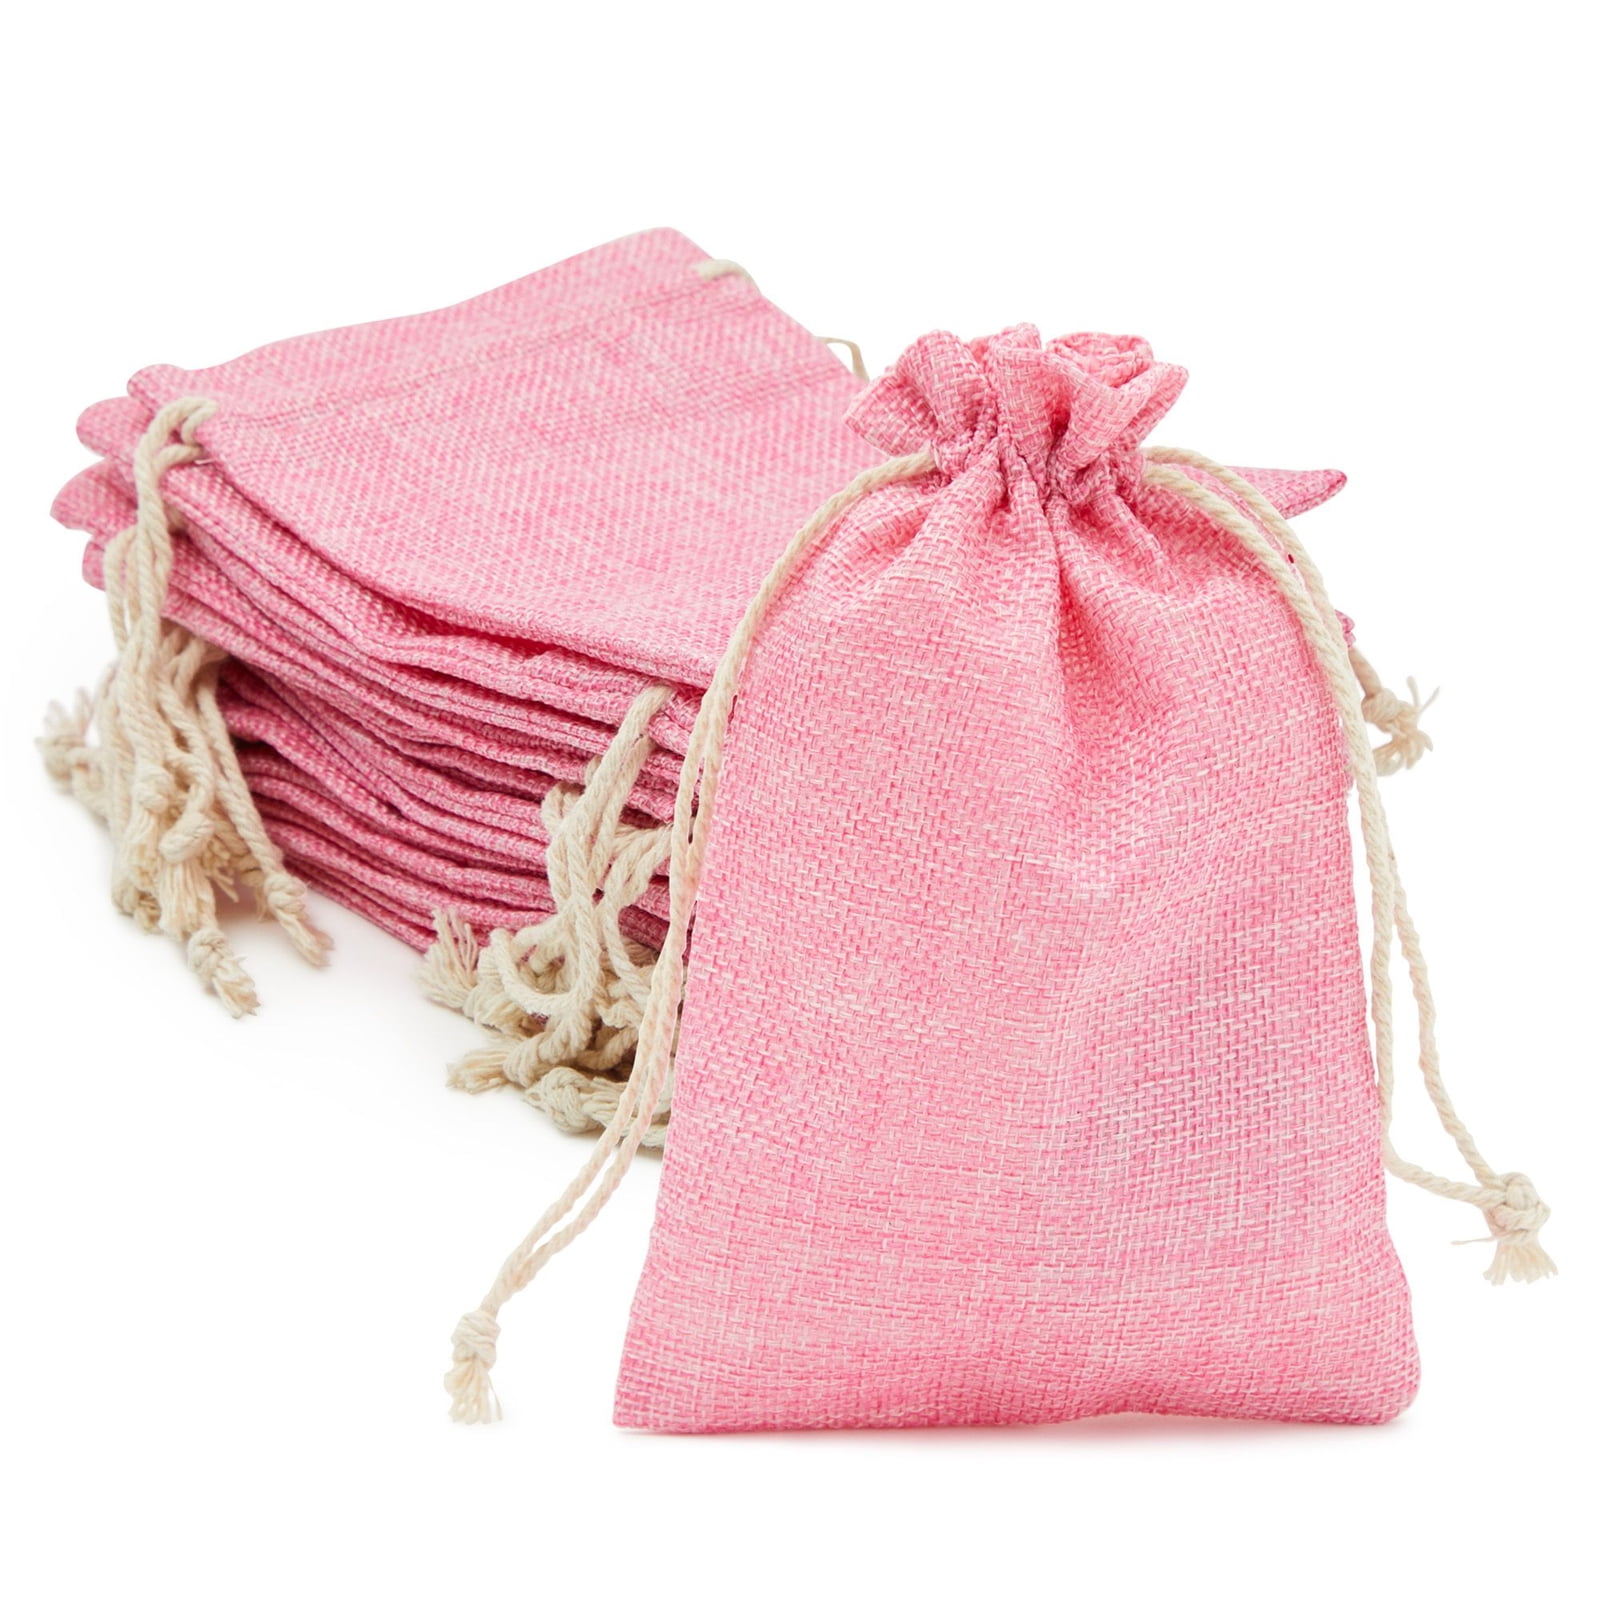 1 to 25 Small VELVET PINK CREAM GIFT POUCHES Jewellery Drawstring BAGS Wholesale 